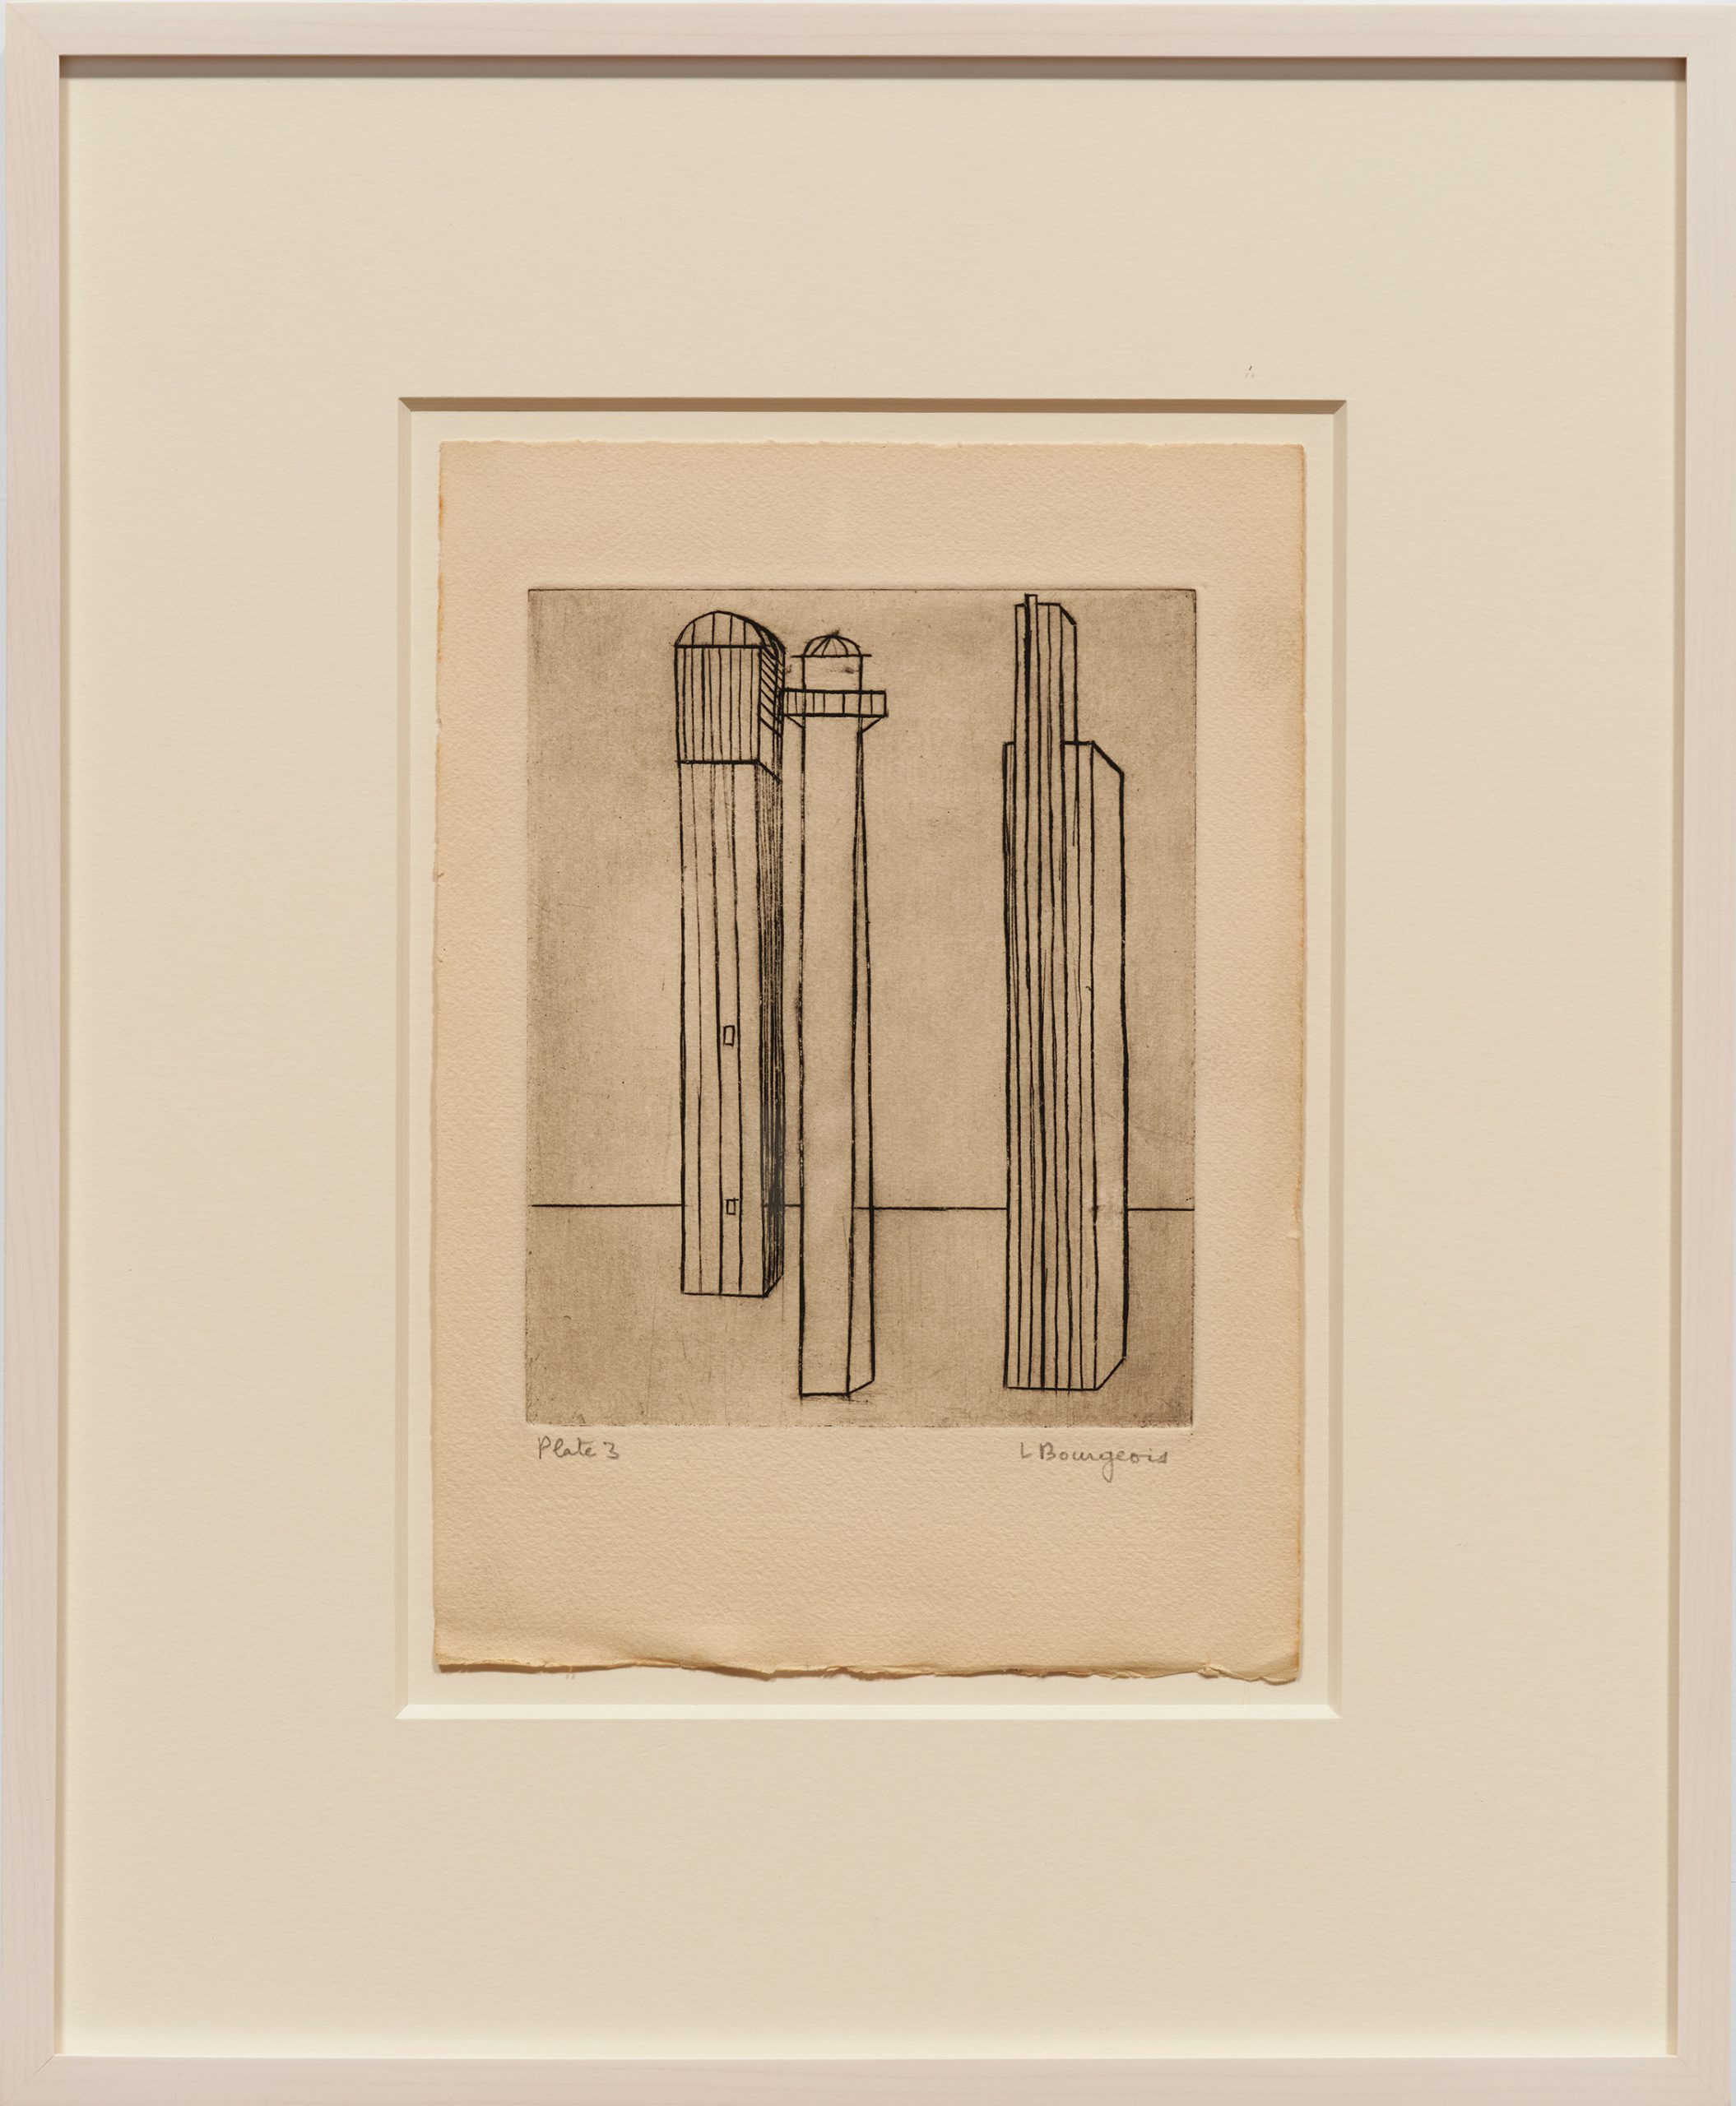 He Disappeared into Complete Silence, Plate 3 by Louise Bourgeois